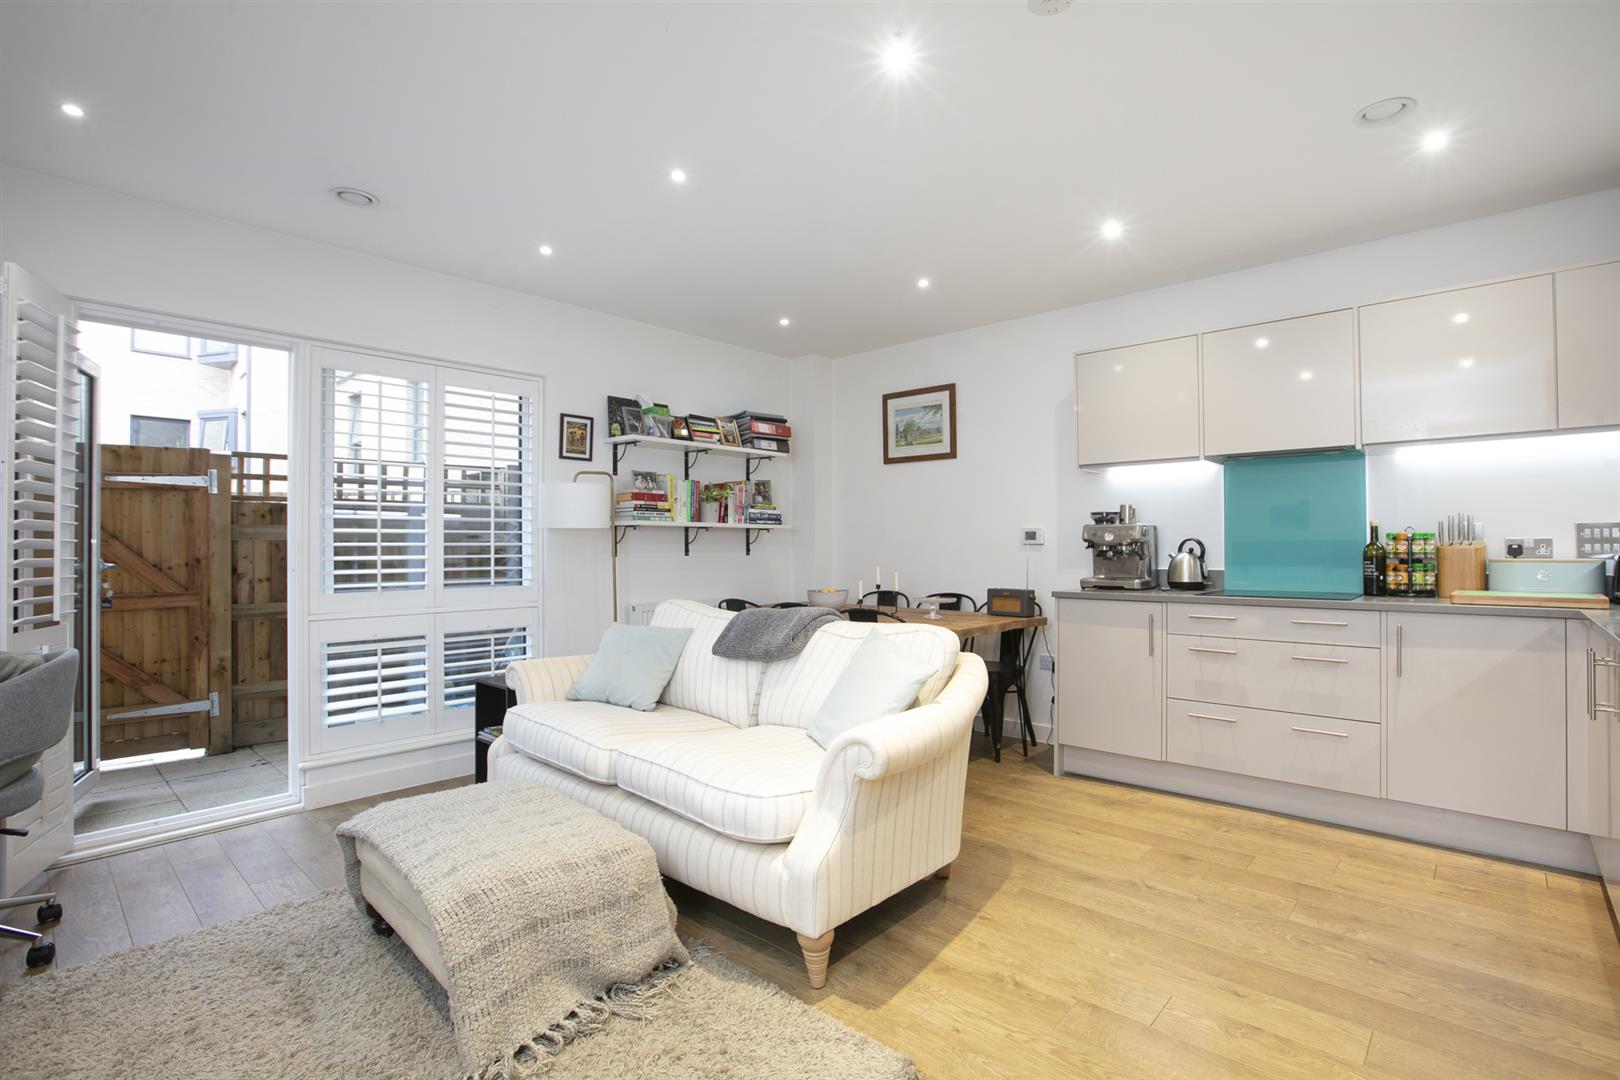 Flat - Purpose Built Under Offer in Horsnell Close, Camberwell, SE5 886 view1